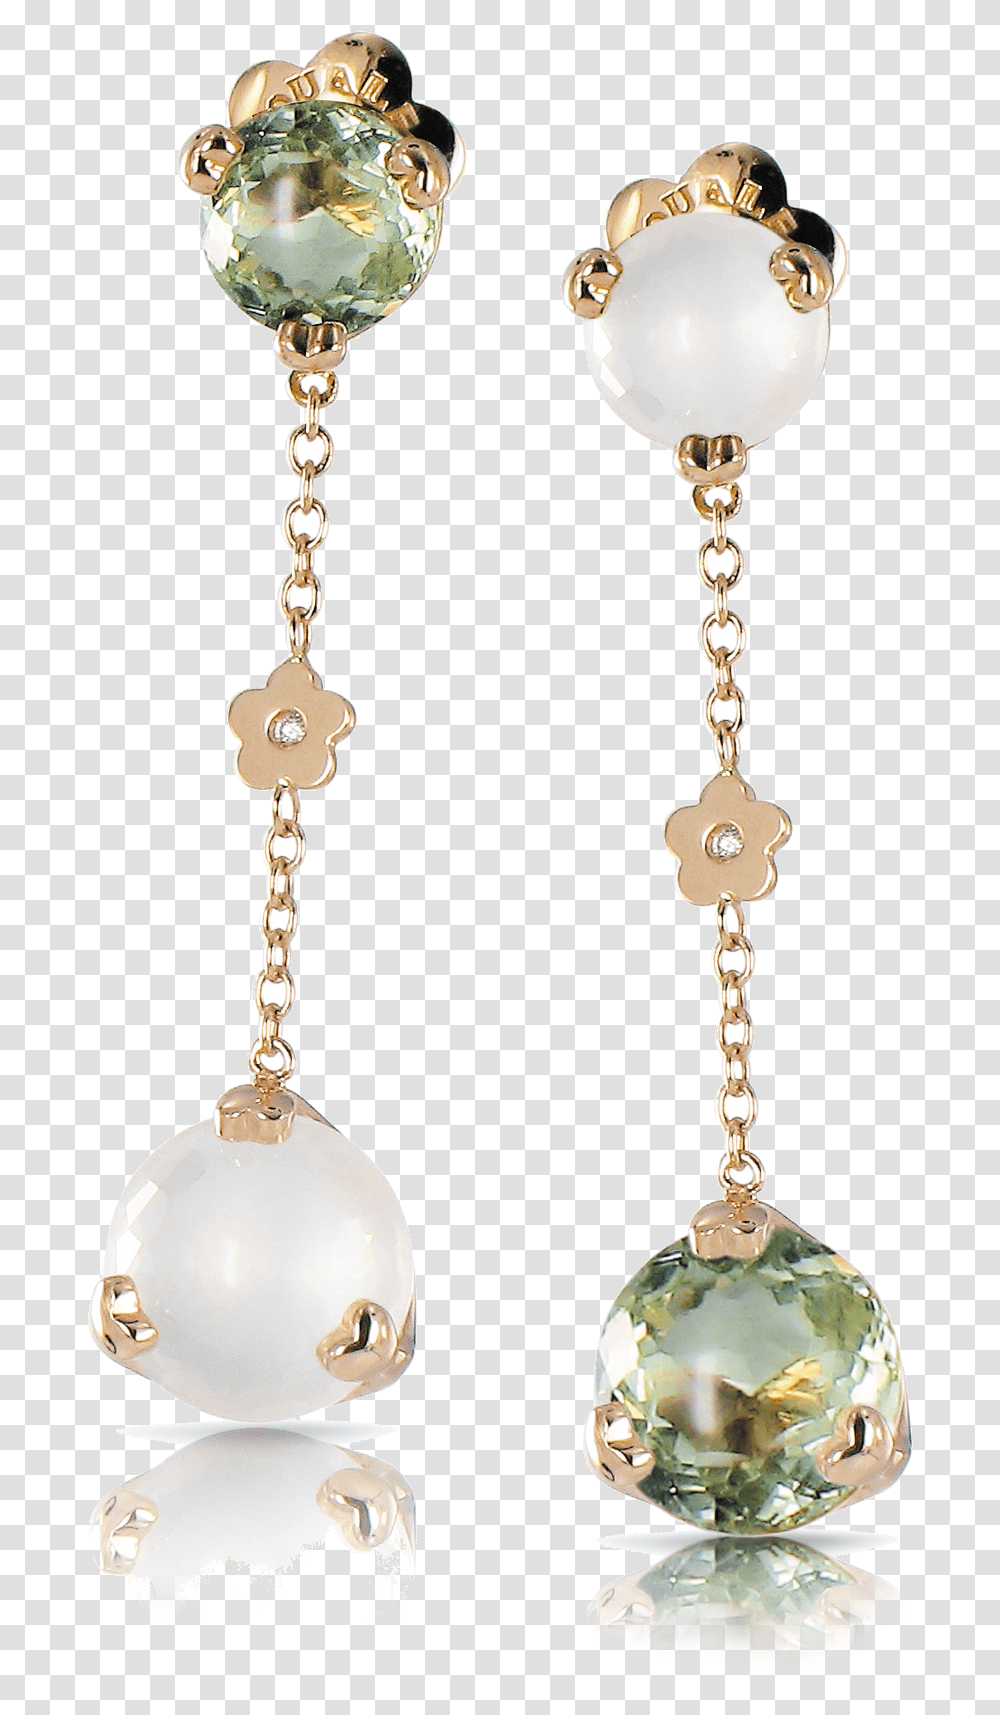 Jewelry Art Vintage Jewelry Jewelry Design Fine Earrings, Accessories, Accessory, Lighting Transparent Png